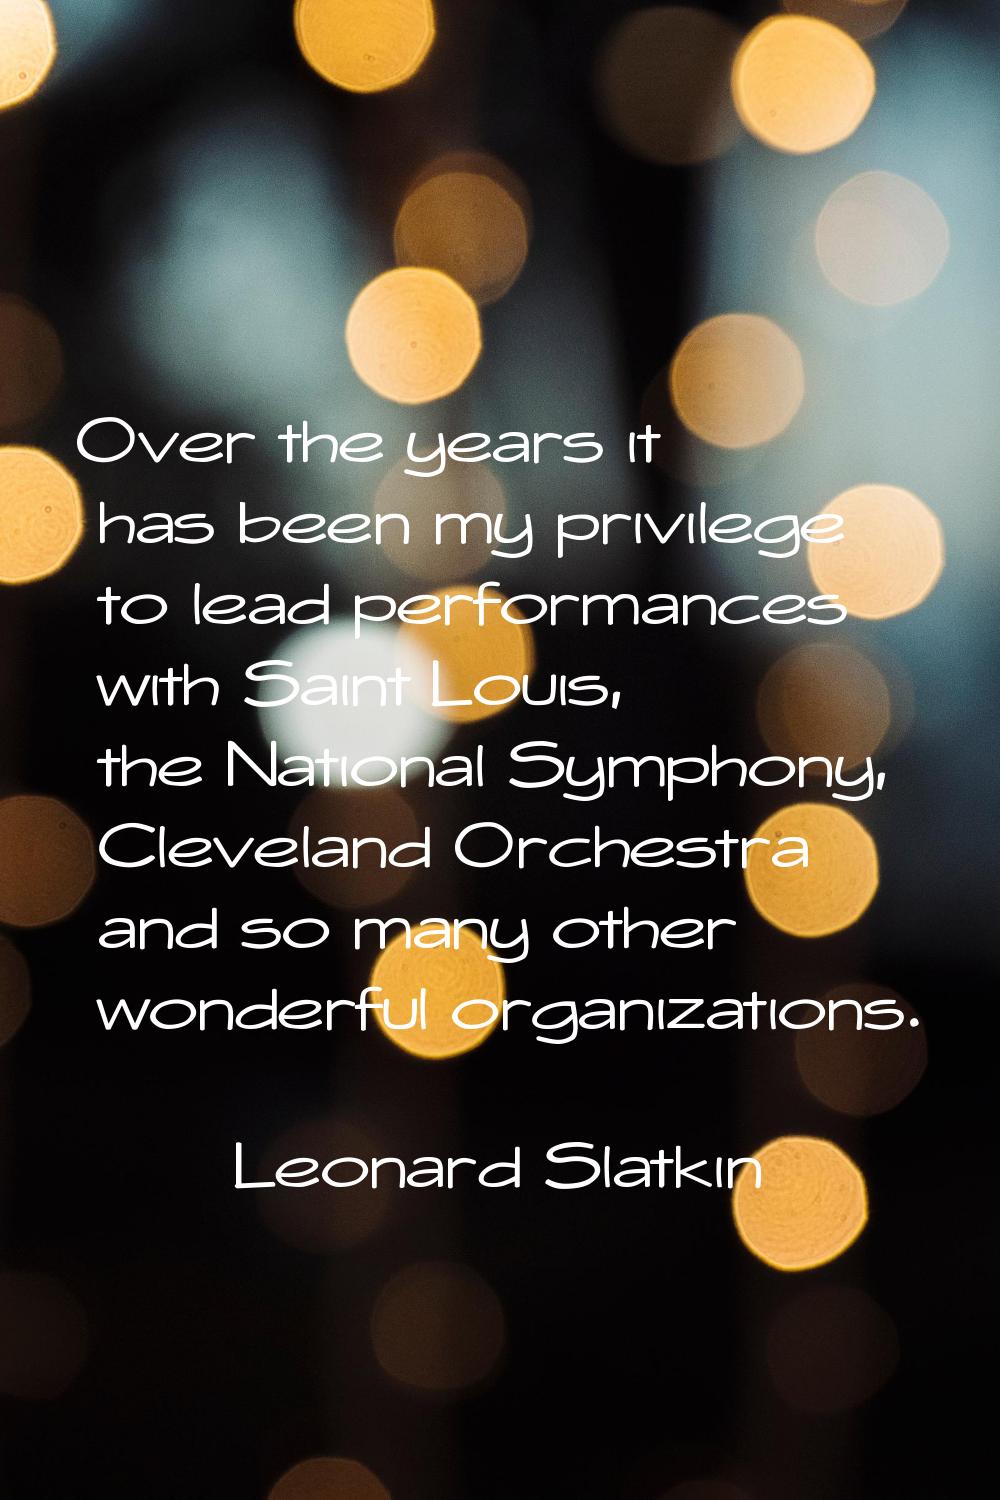 Over the years it has been my privilege to lead performances with Saint Louis, the National Symphon